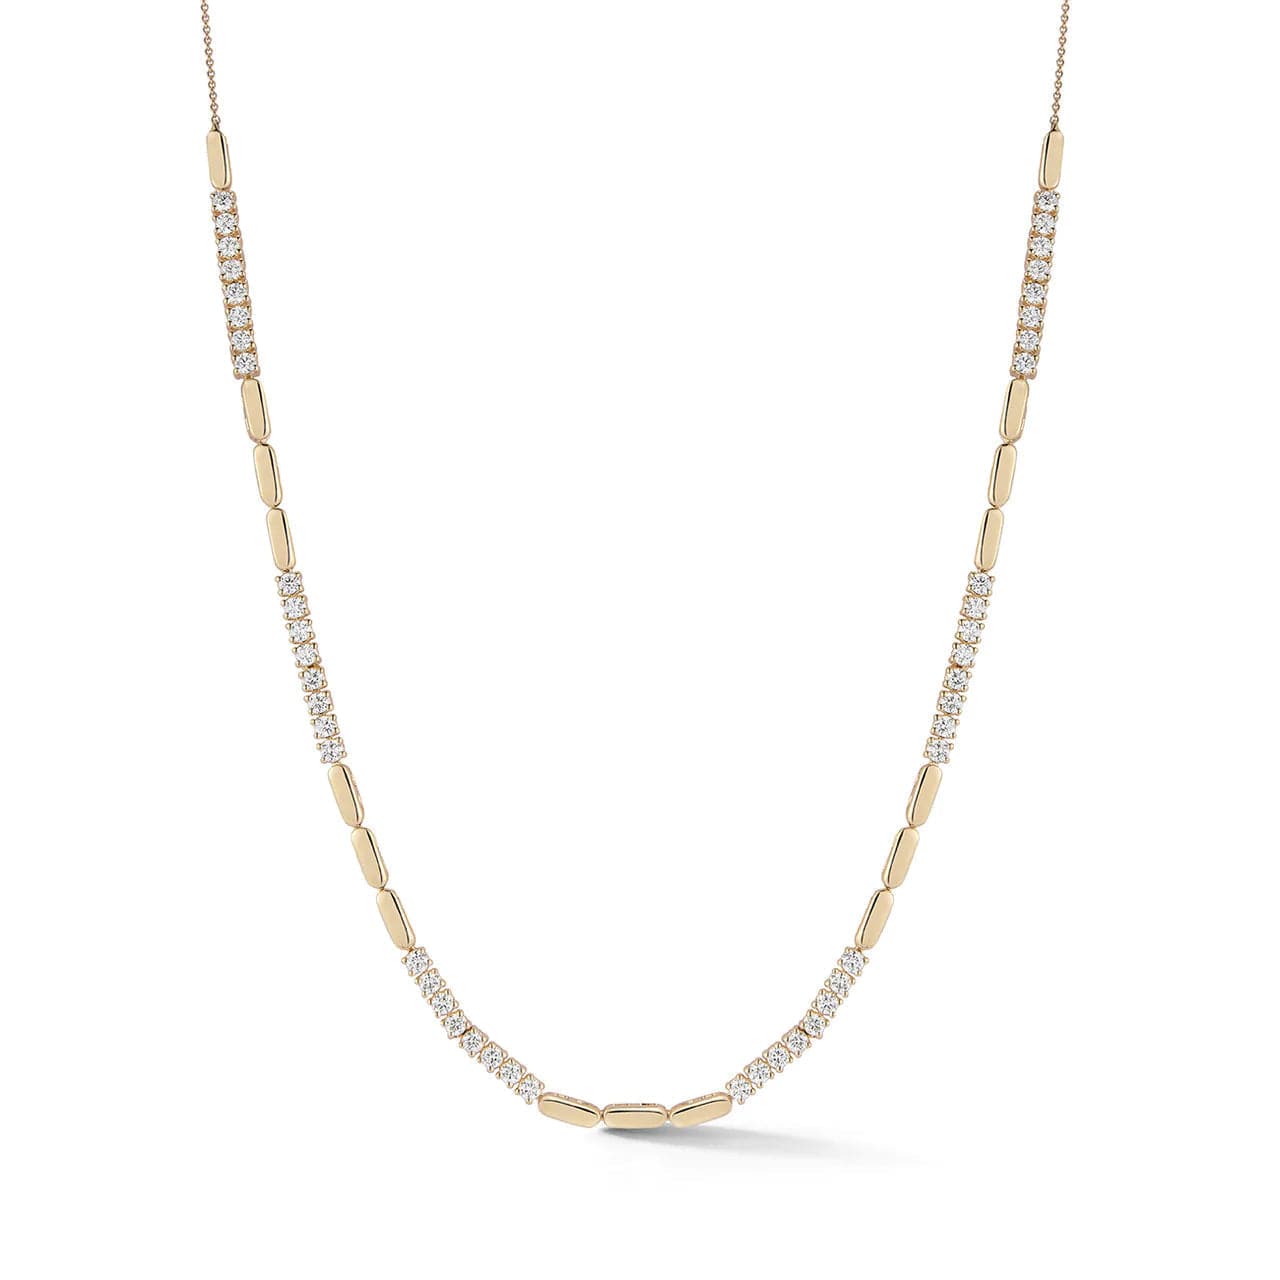 4mm Yellow Gold Signature Tennis Necklace | Diamond tennis necklace, Tennis  necklace, Gold necklace women